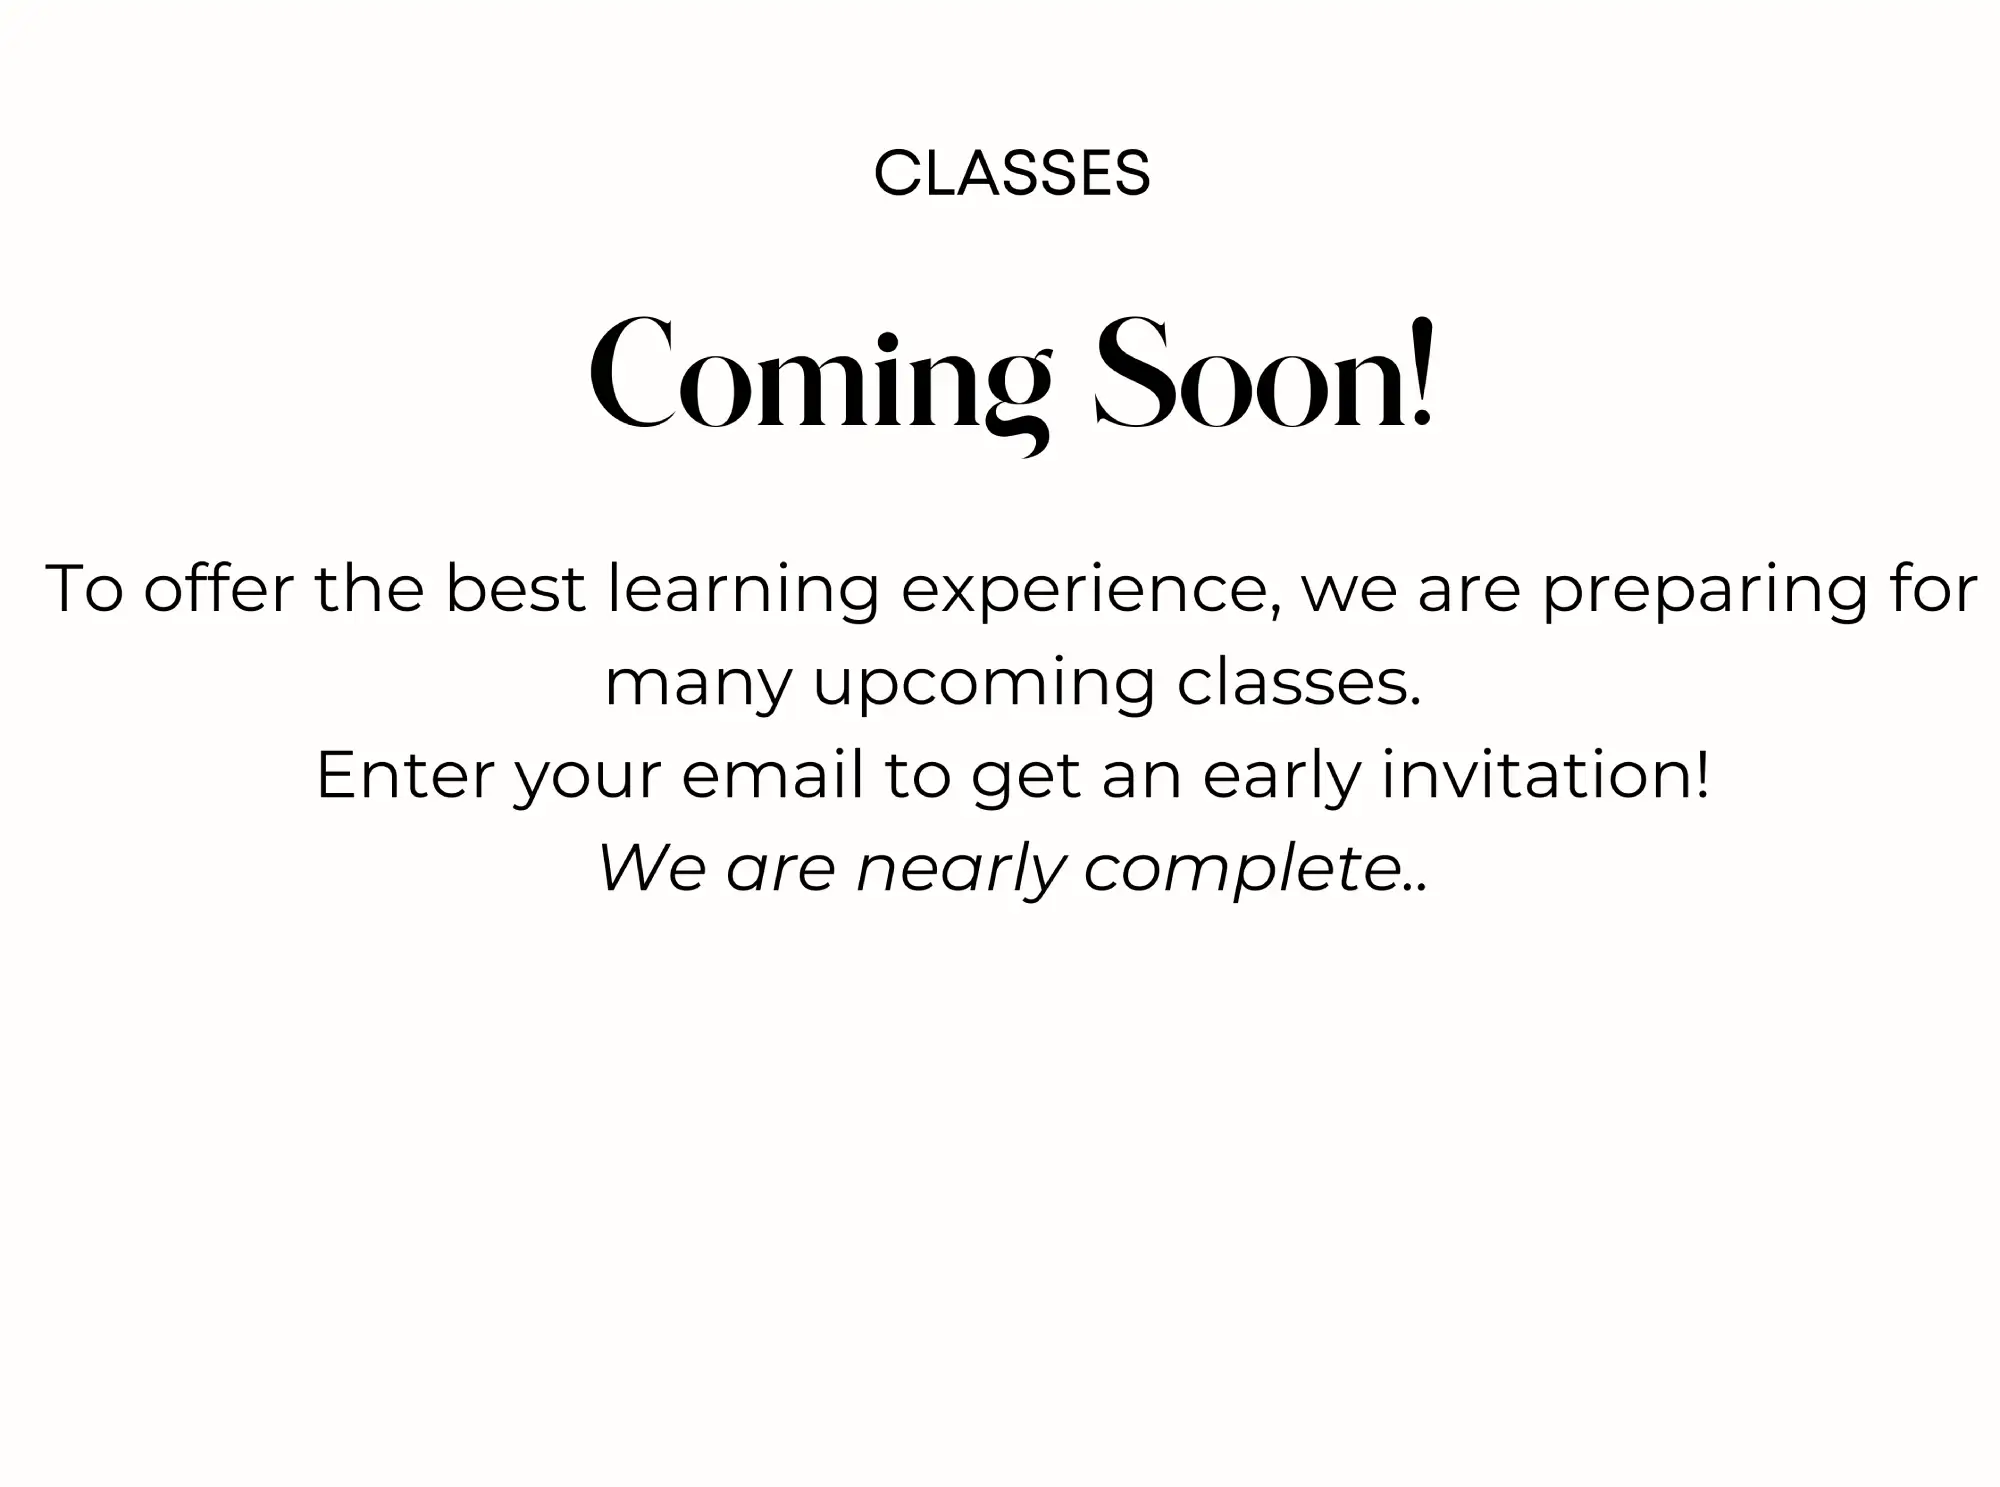 coming soon classes